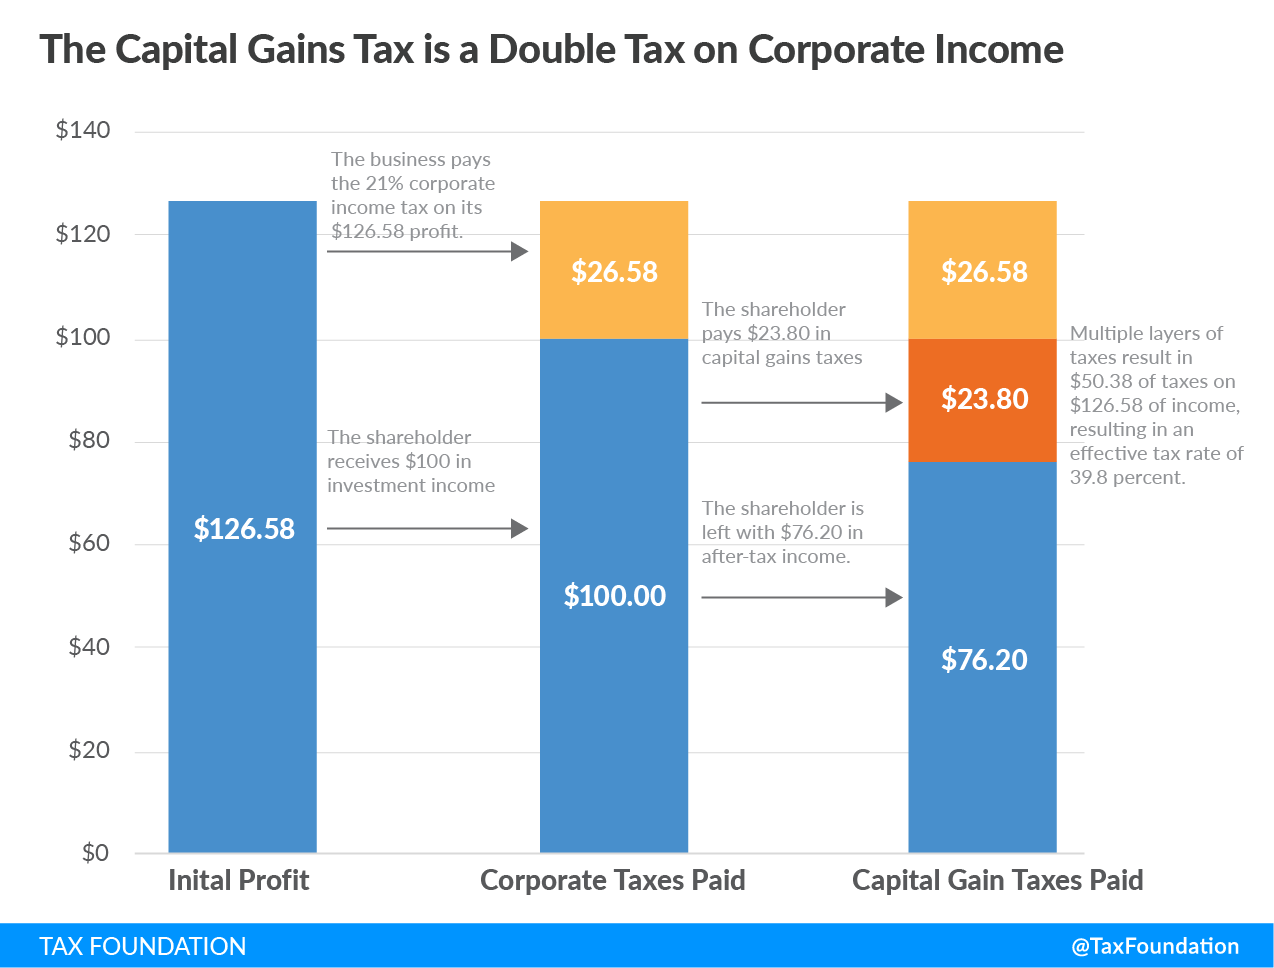 The capital gains tax is a double tax on corporate income